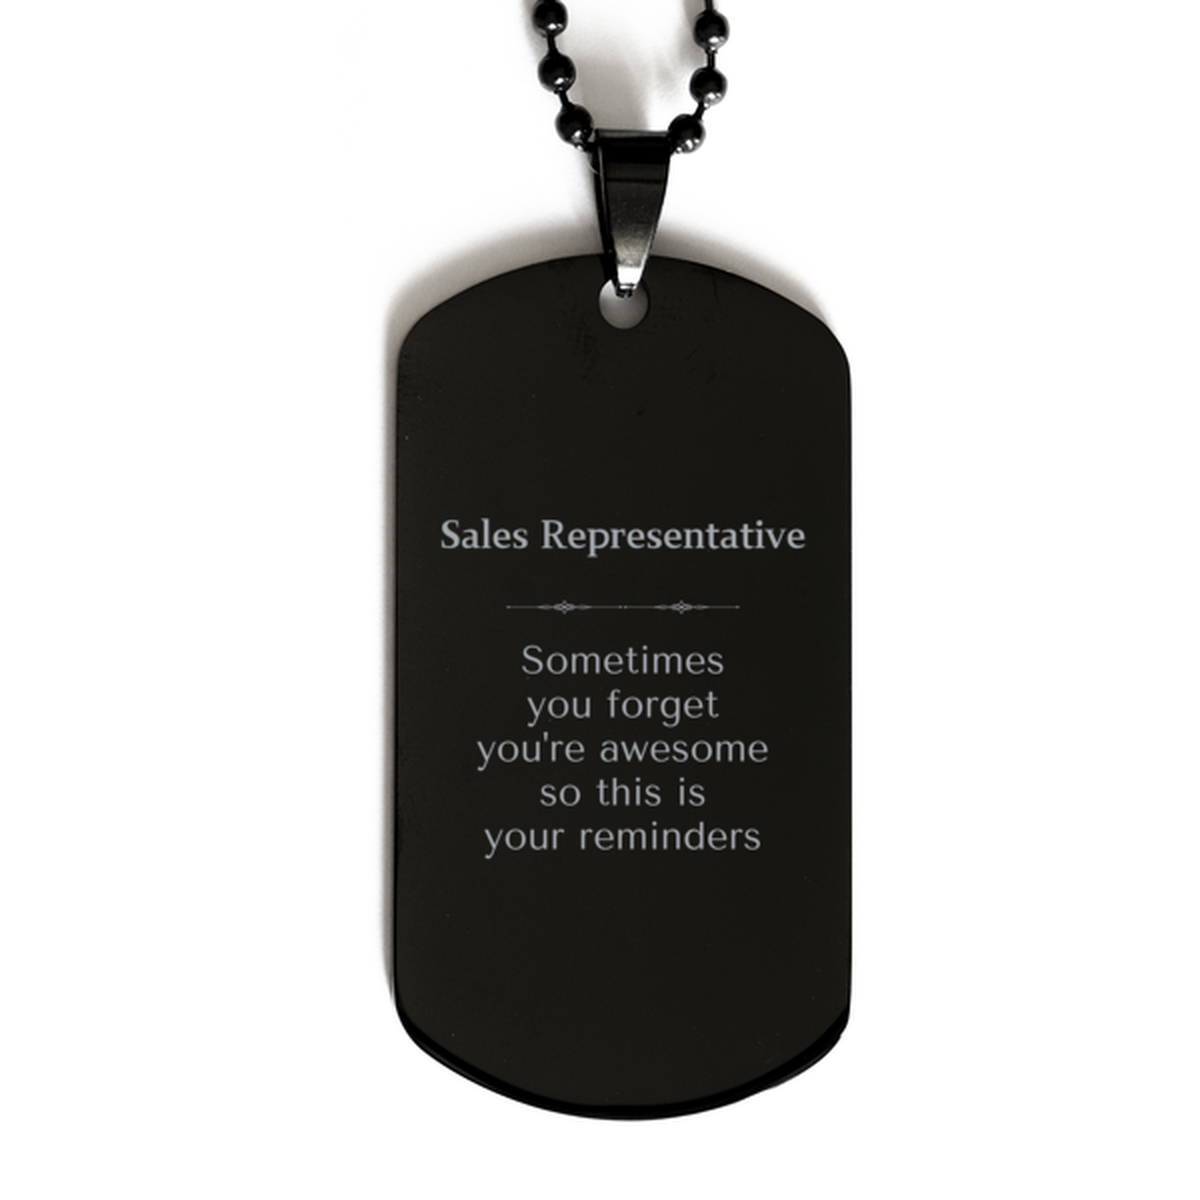 Sentimental Sales Representative Black Dog Tag, Sales Representative Sometimes you forget you're awesome so this is your reminders, Graduation Christmas Birthday Gifts for Sales Representative, Men, Women, Coworkers